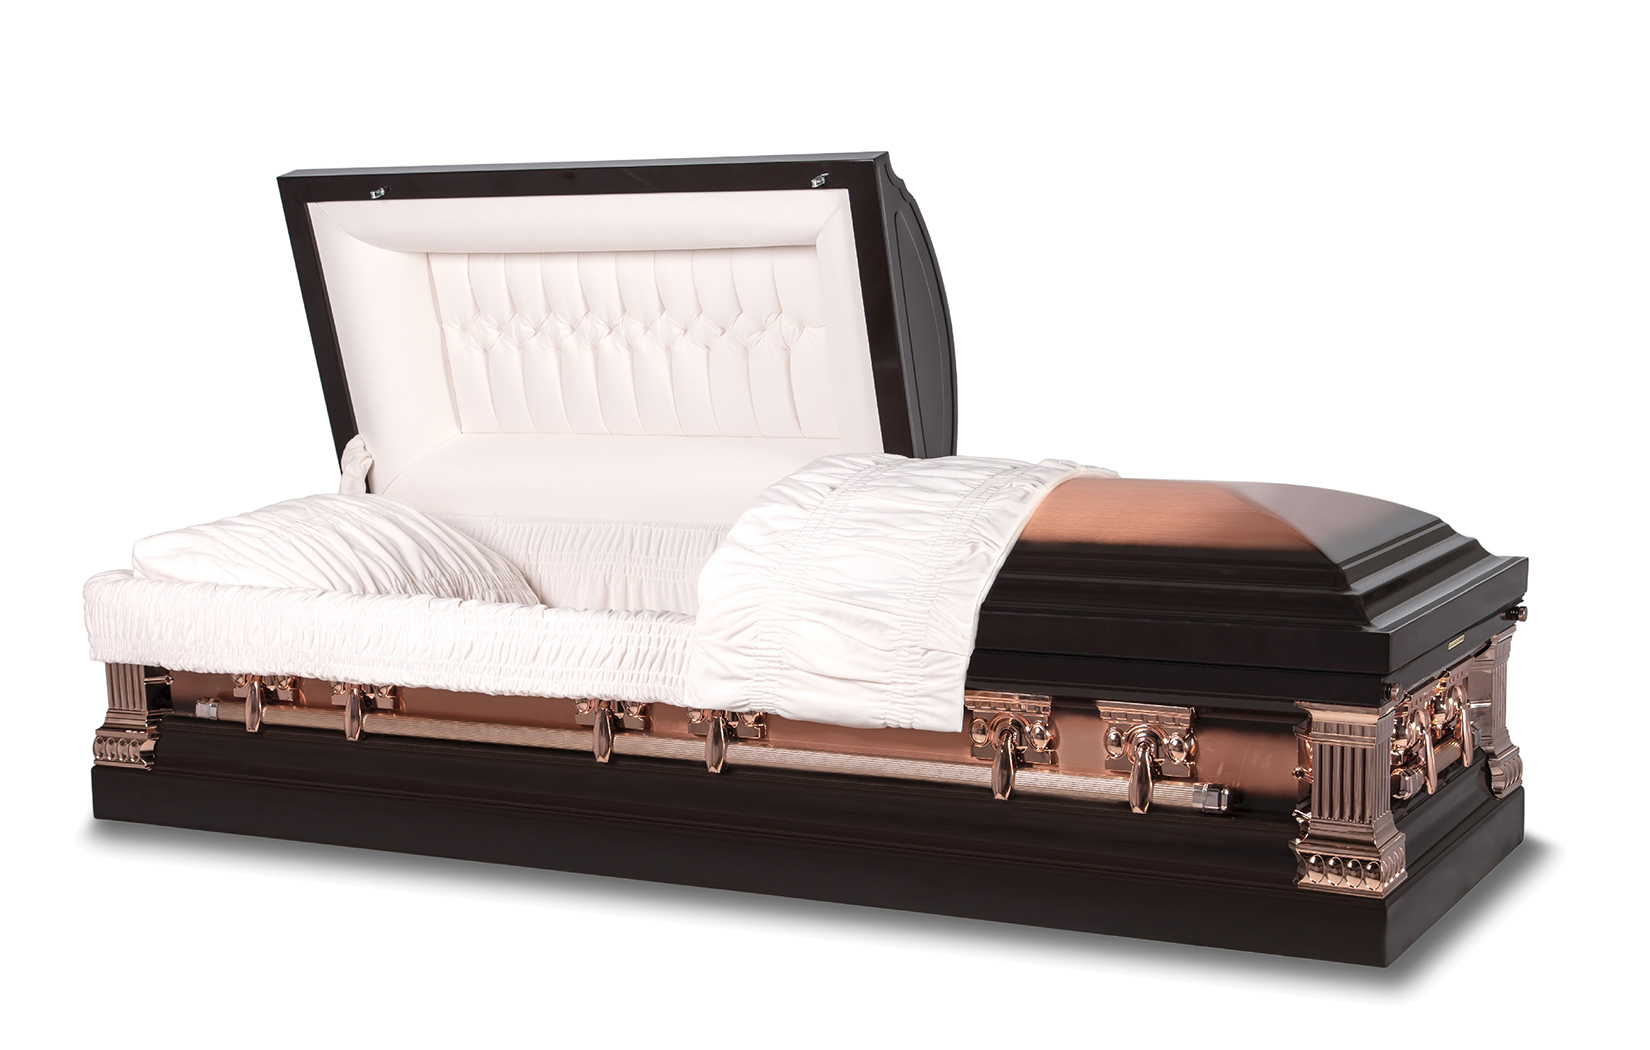 A new precious casket for Champagne and Cognac at Charles de